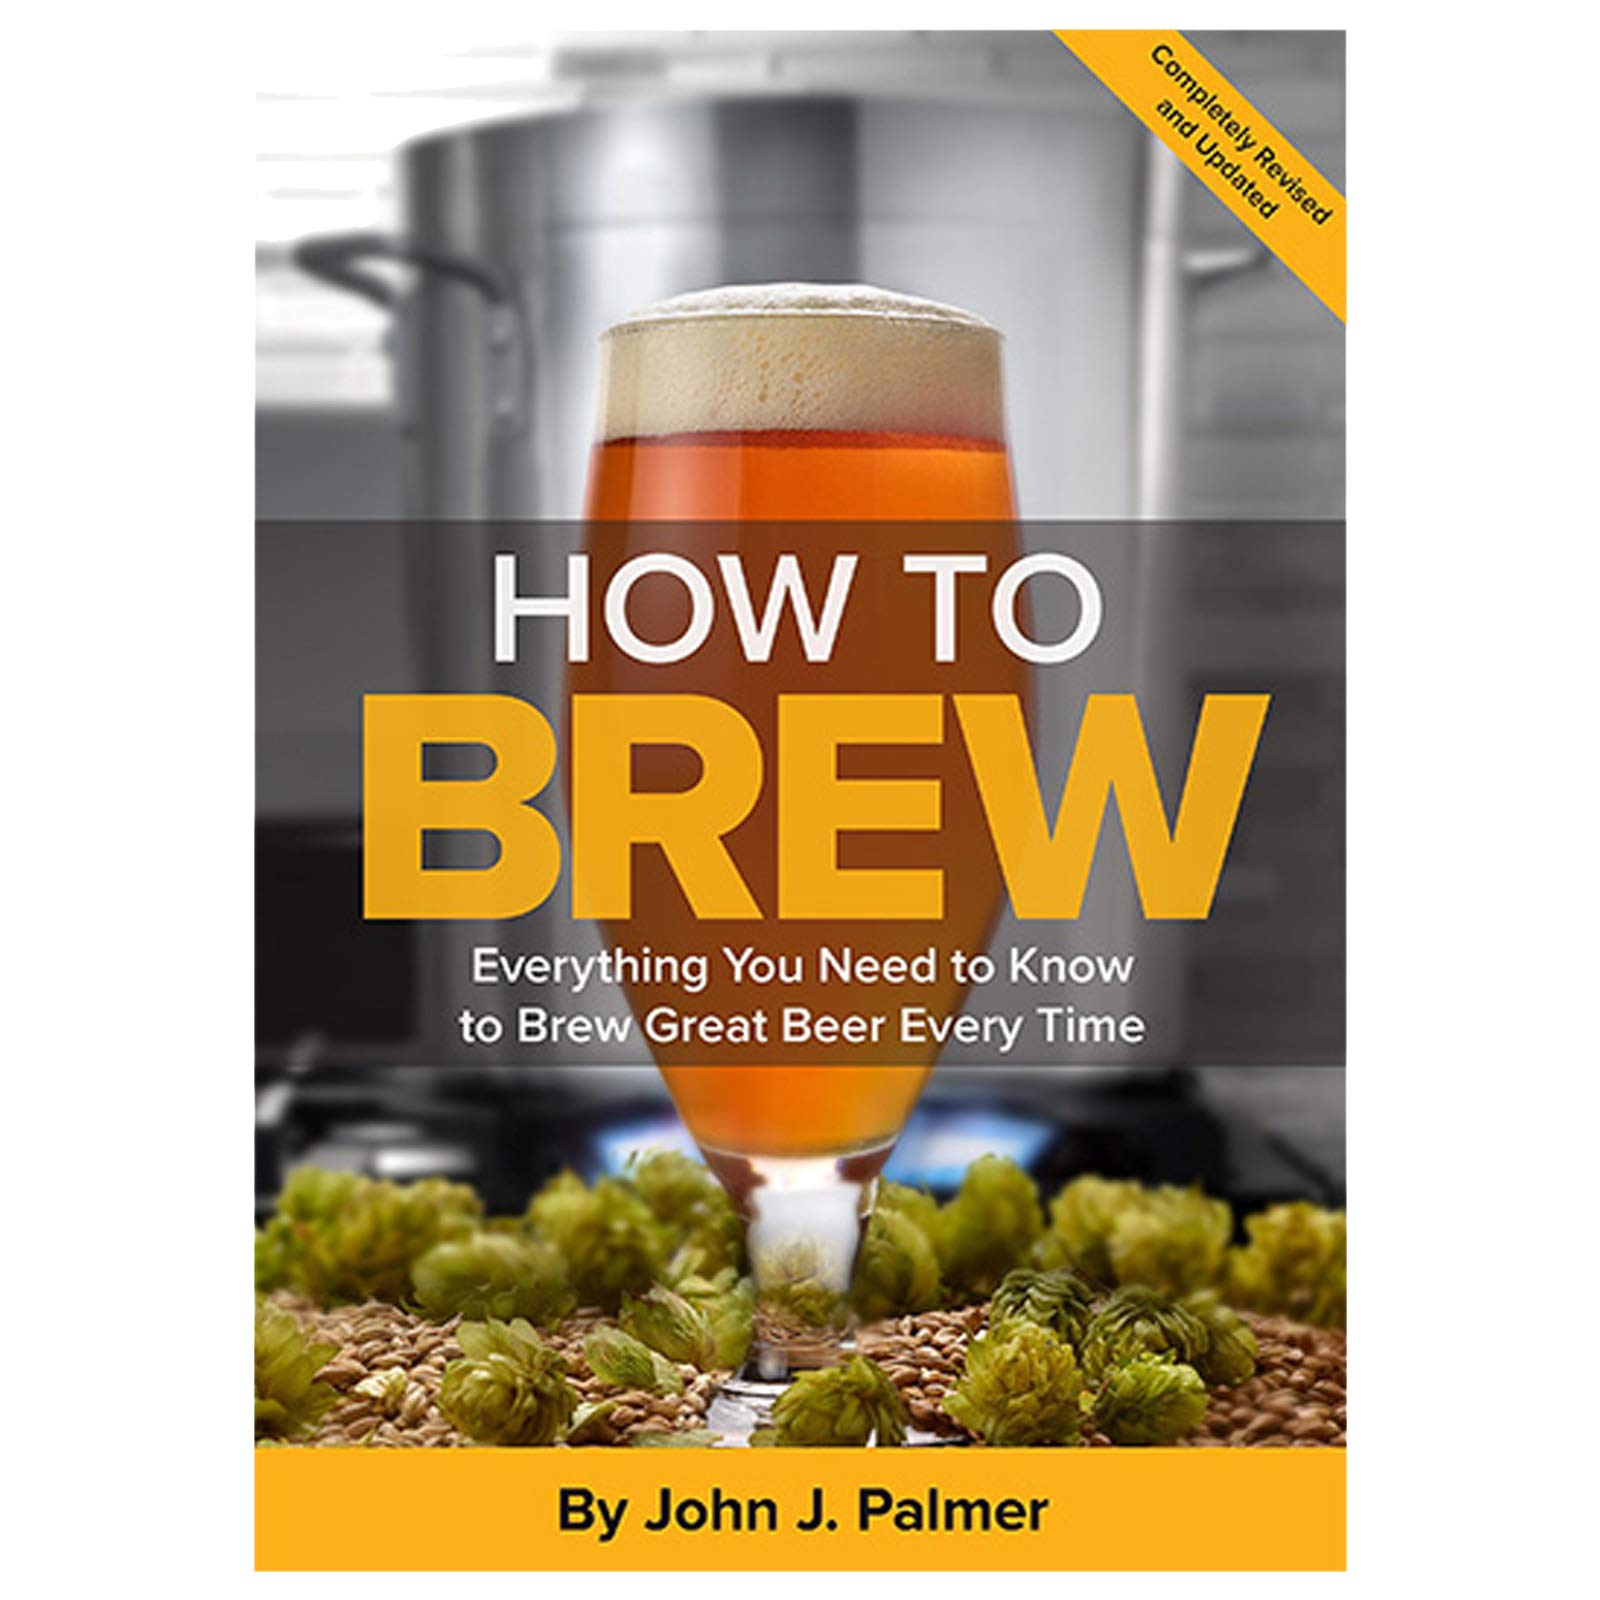 How To Brew: Everything You Need to Know to Brew Great Beer Every Time